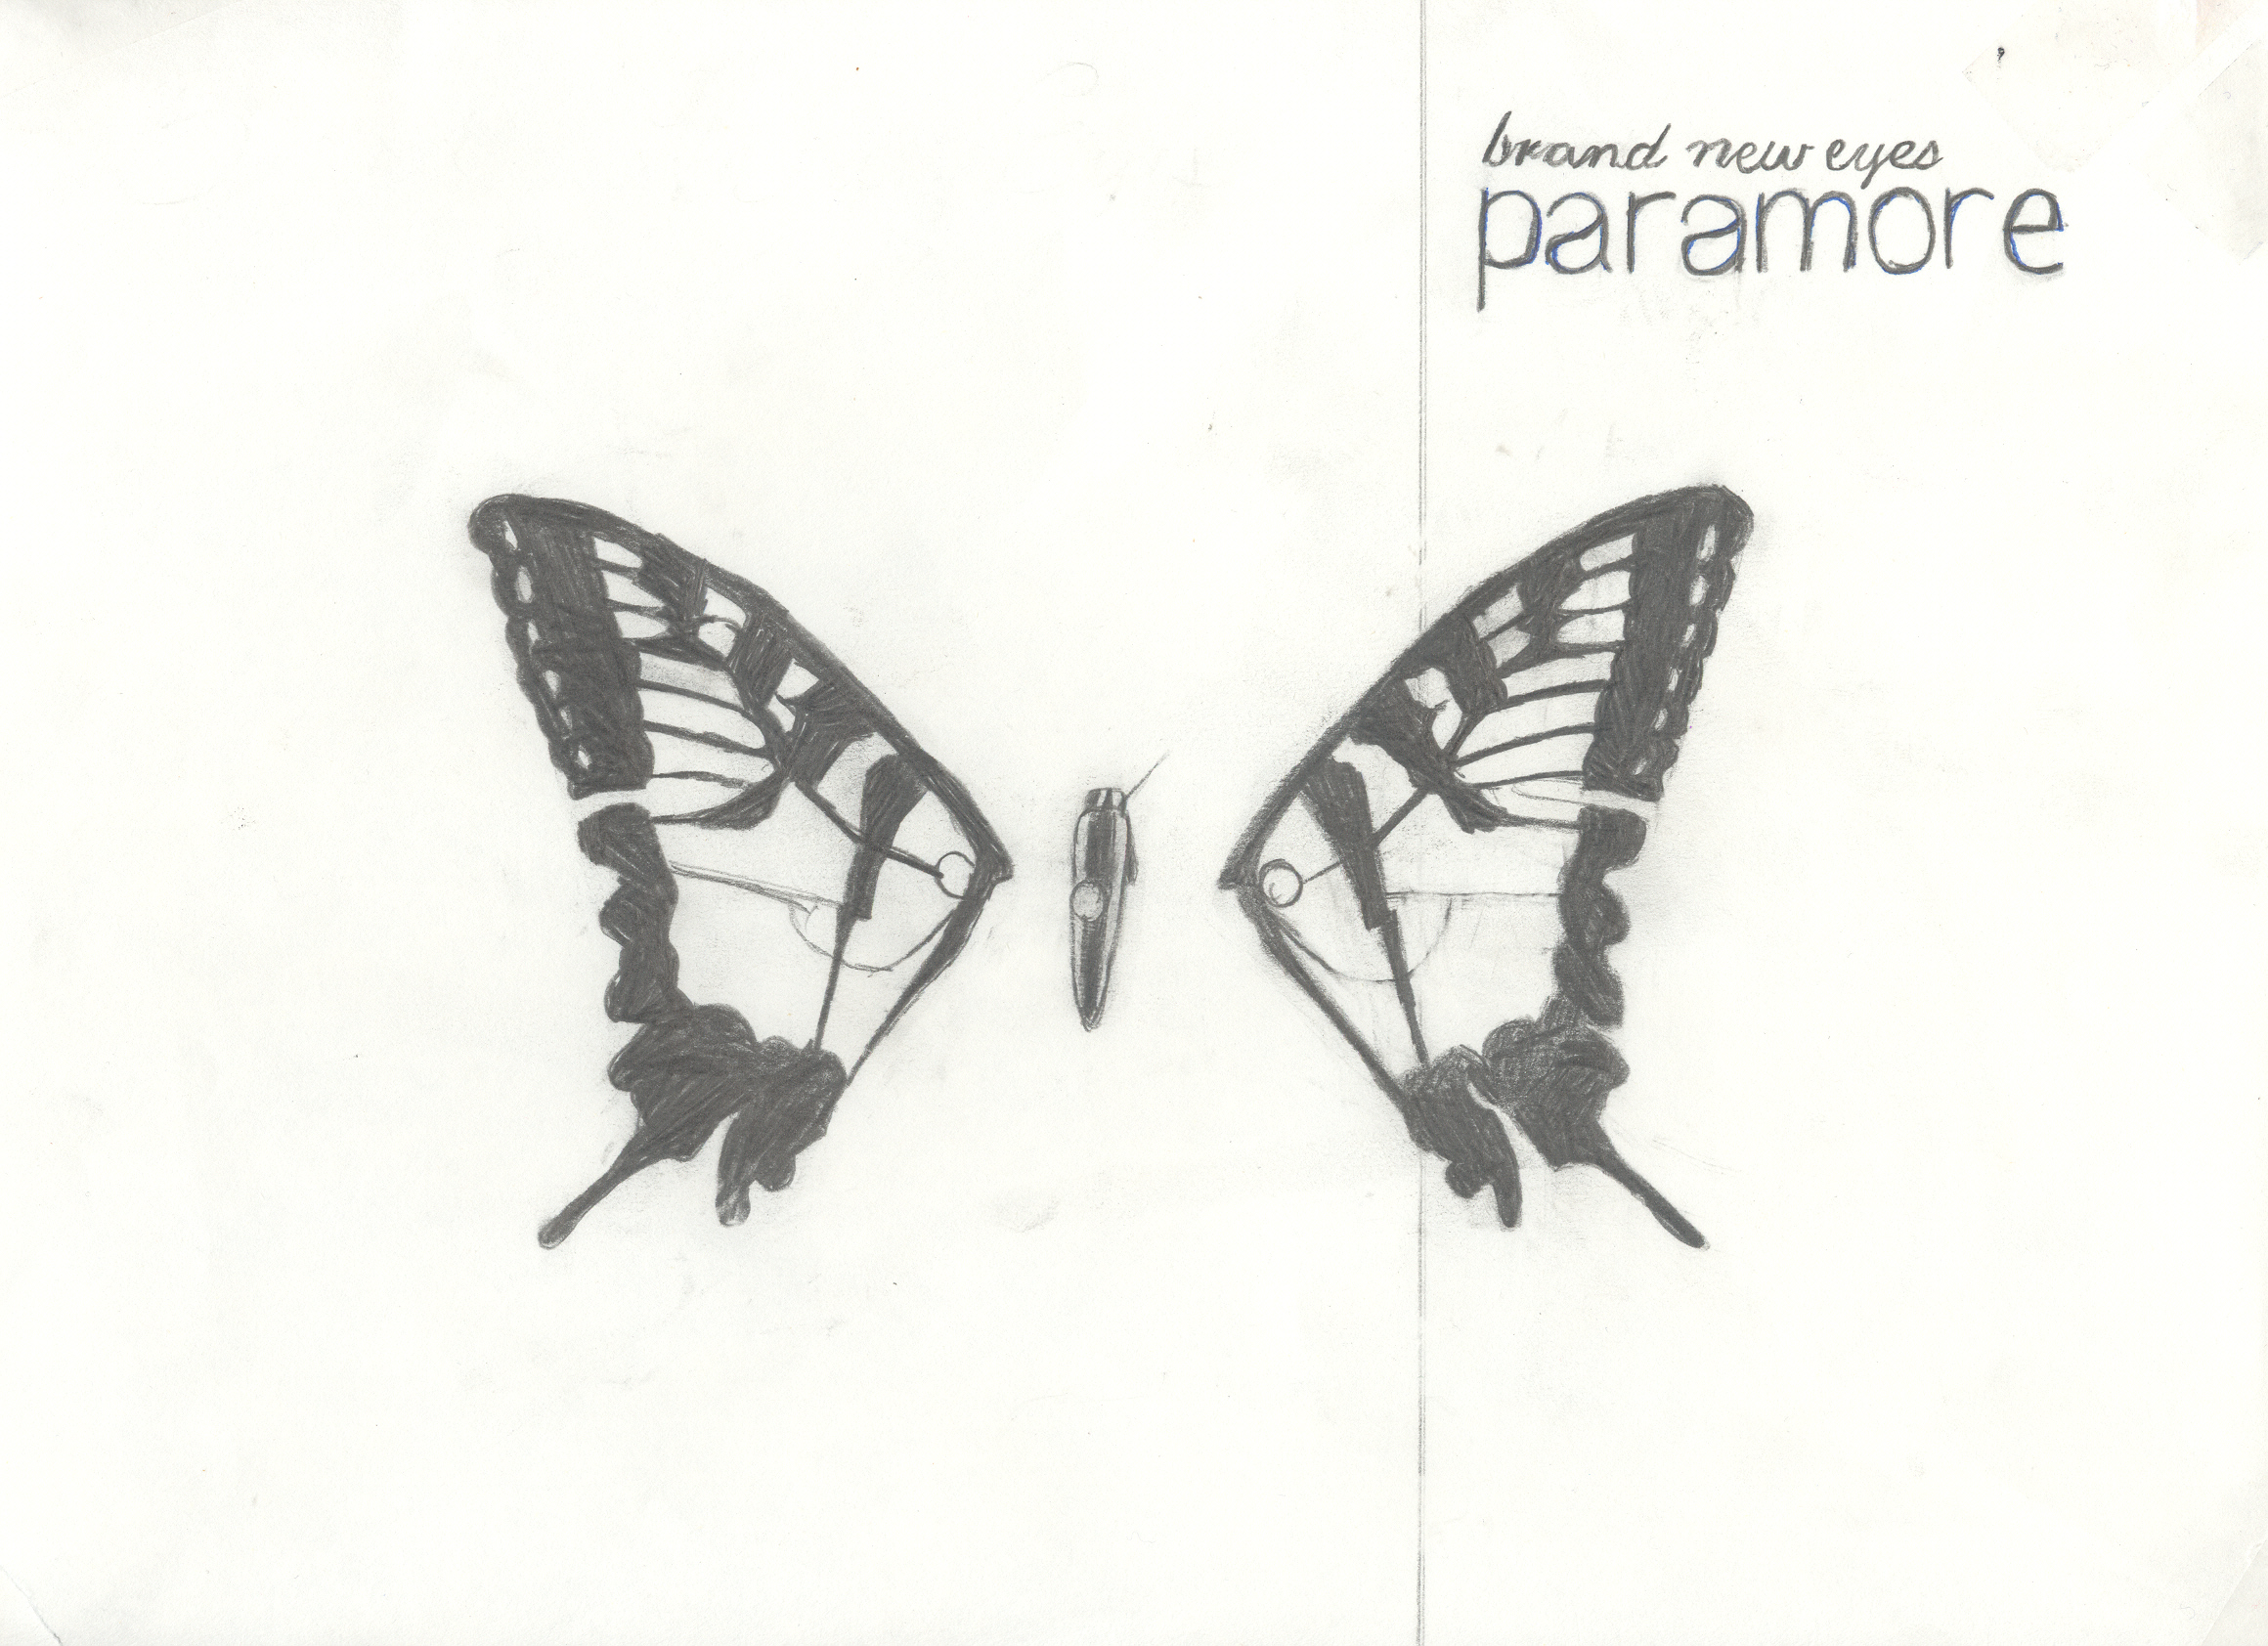 Paramore Brand New Eyes by Dgeex on DeviantArt